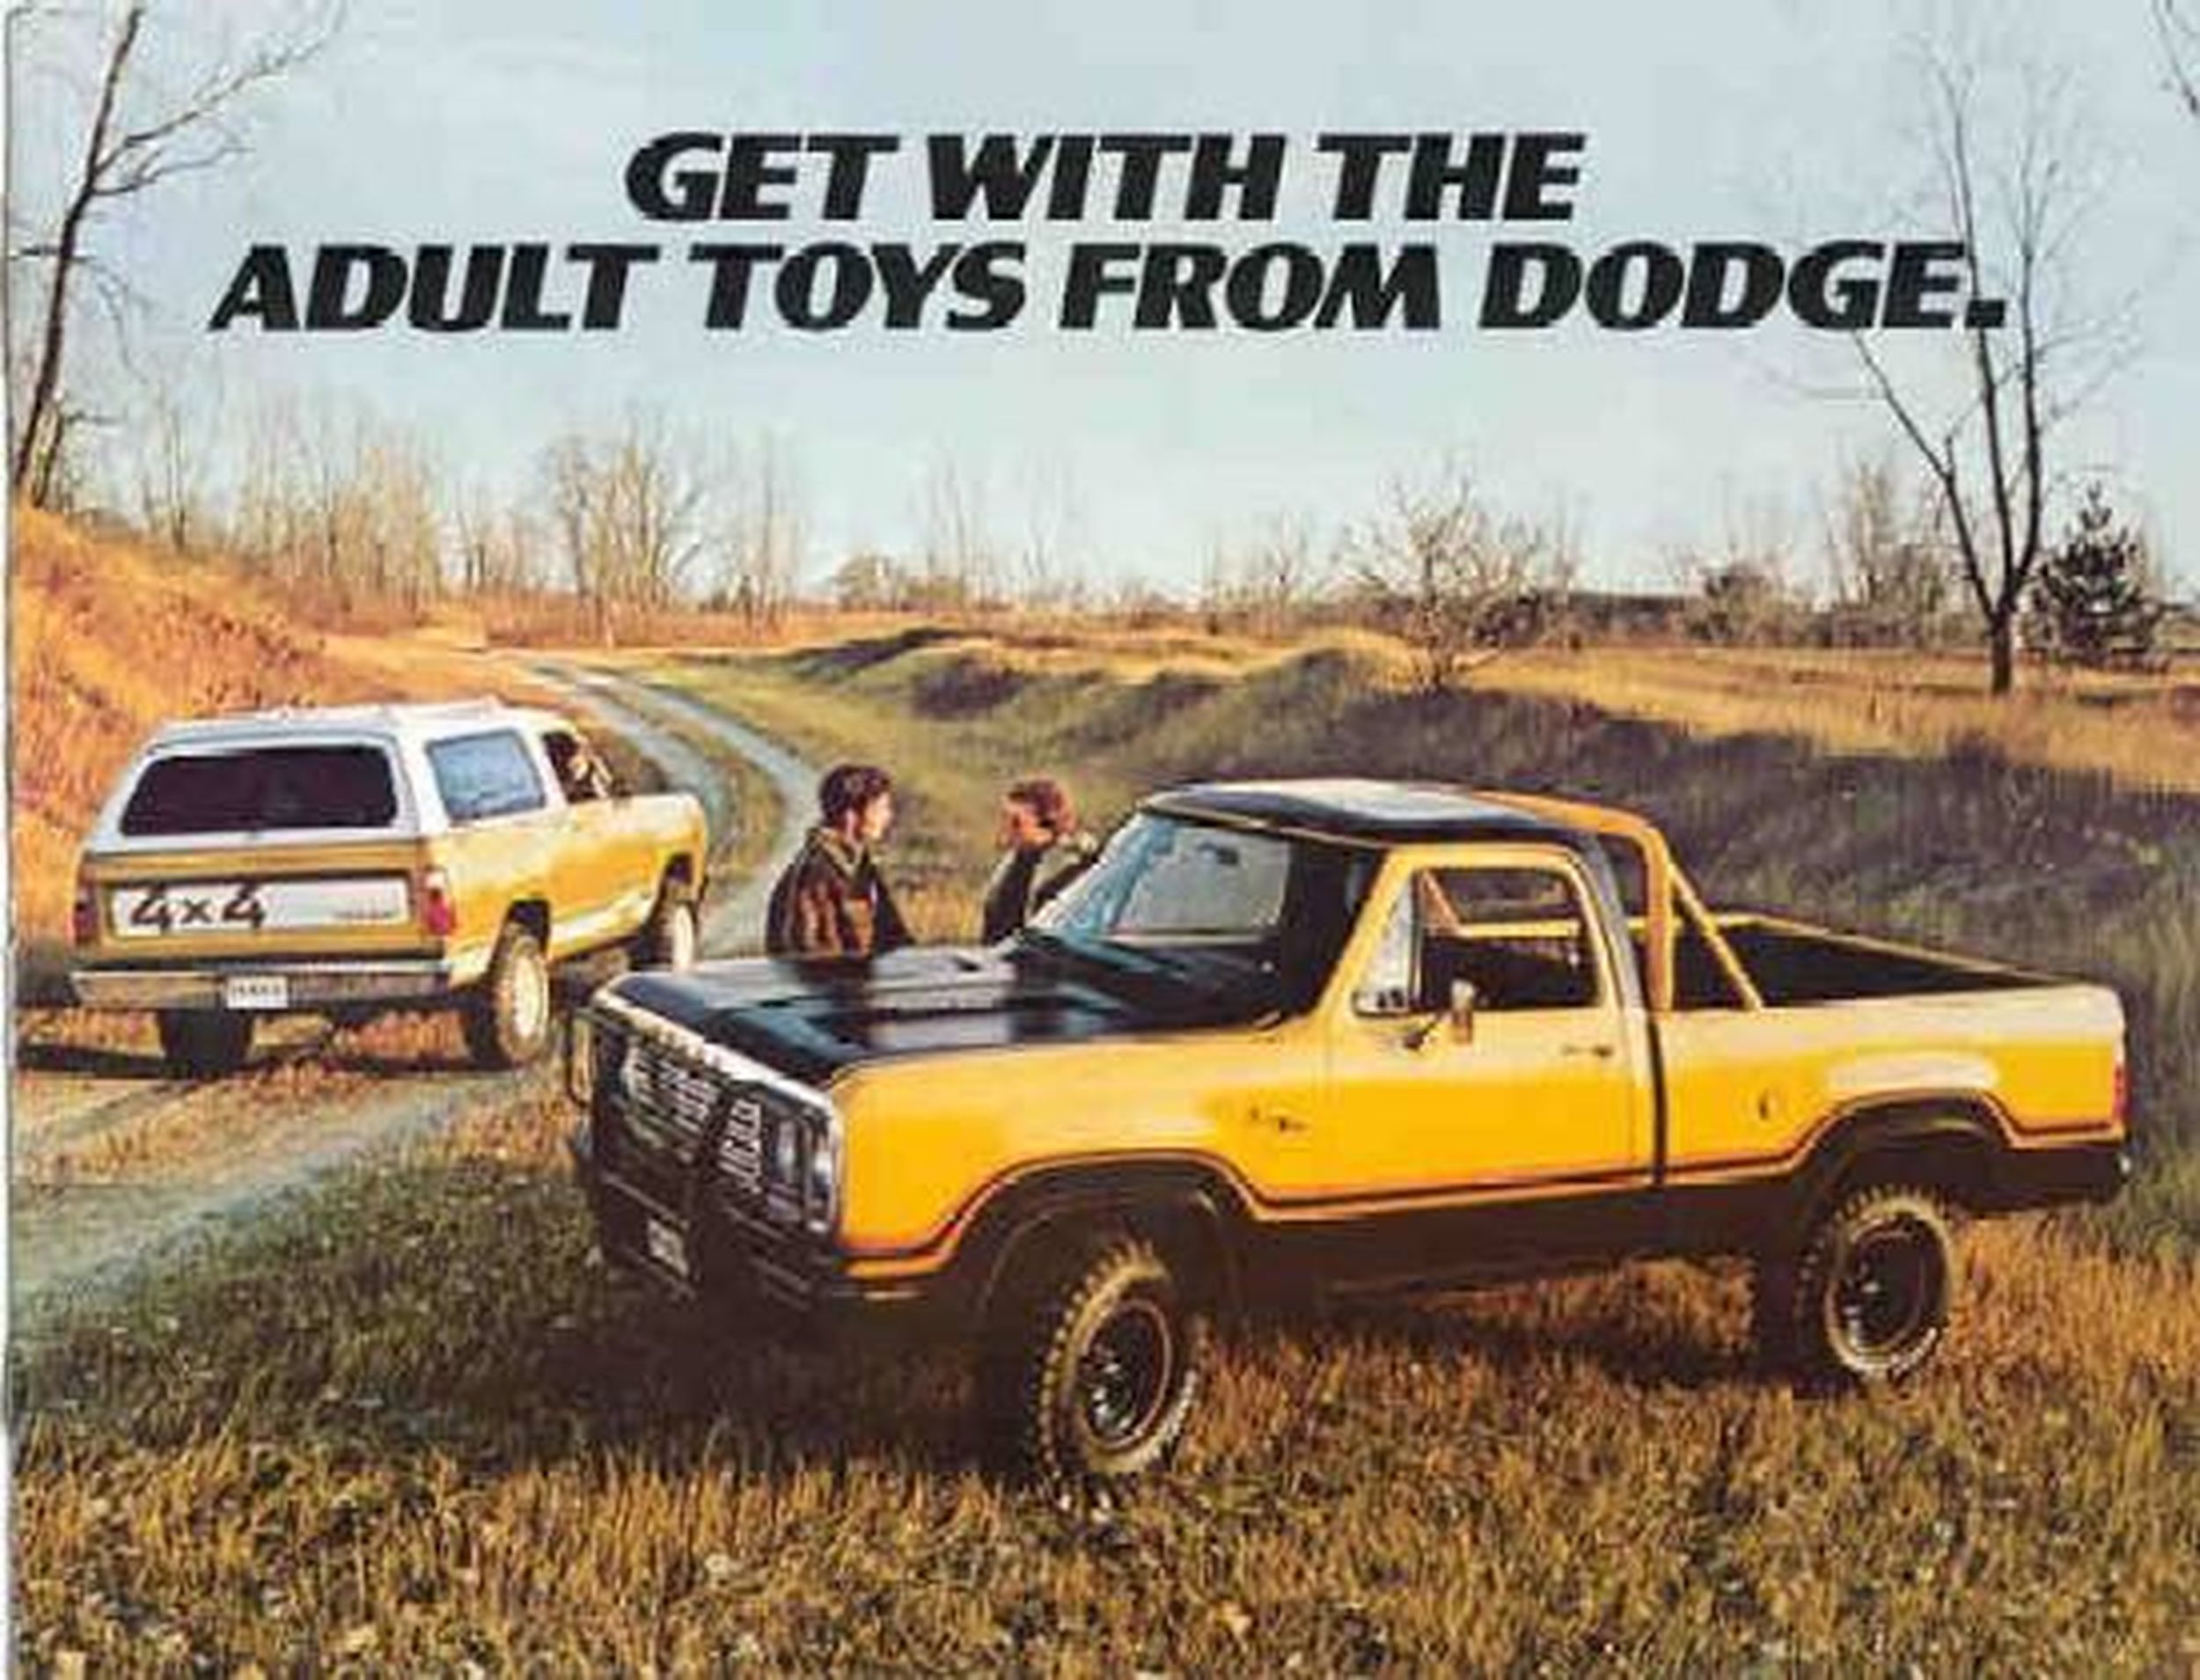 Dodge Toys Of The 1970 S